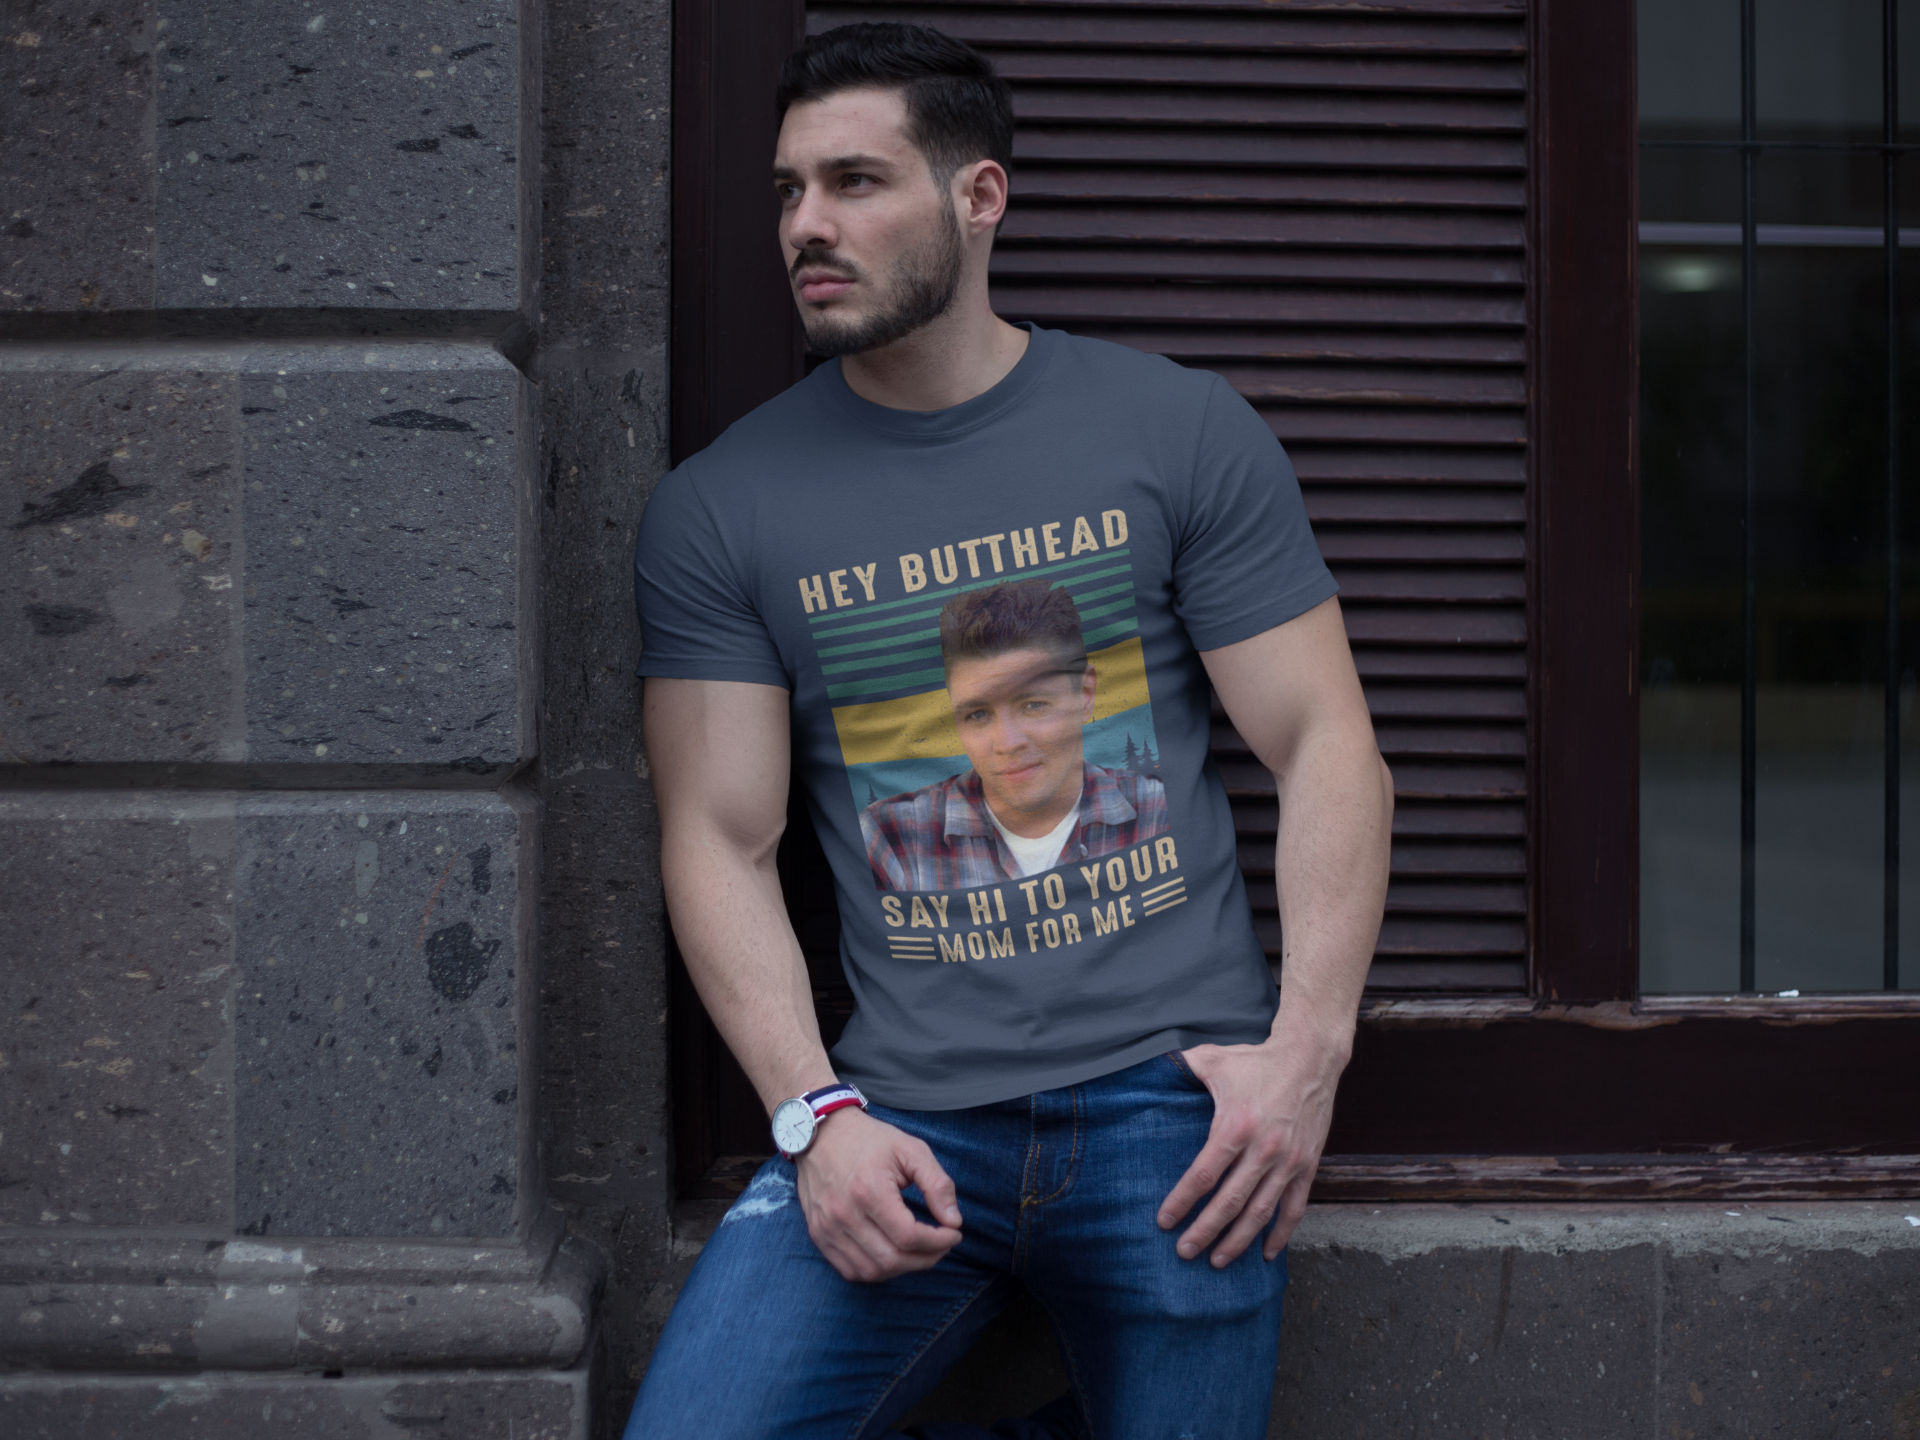 Back To The Future Vintage T Shirt, Hey Butthead Say Hi To Your Mom For Me Tshirt, Biff Howard Tannen T Shirt